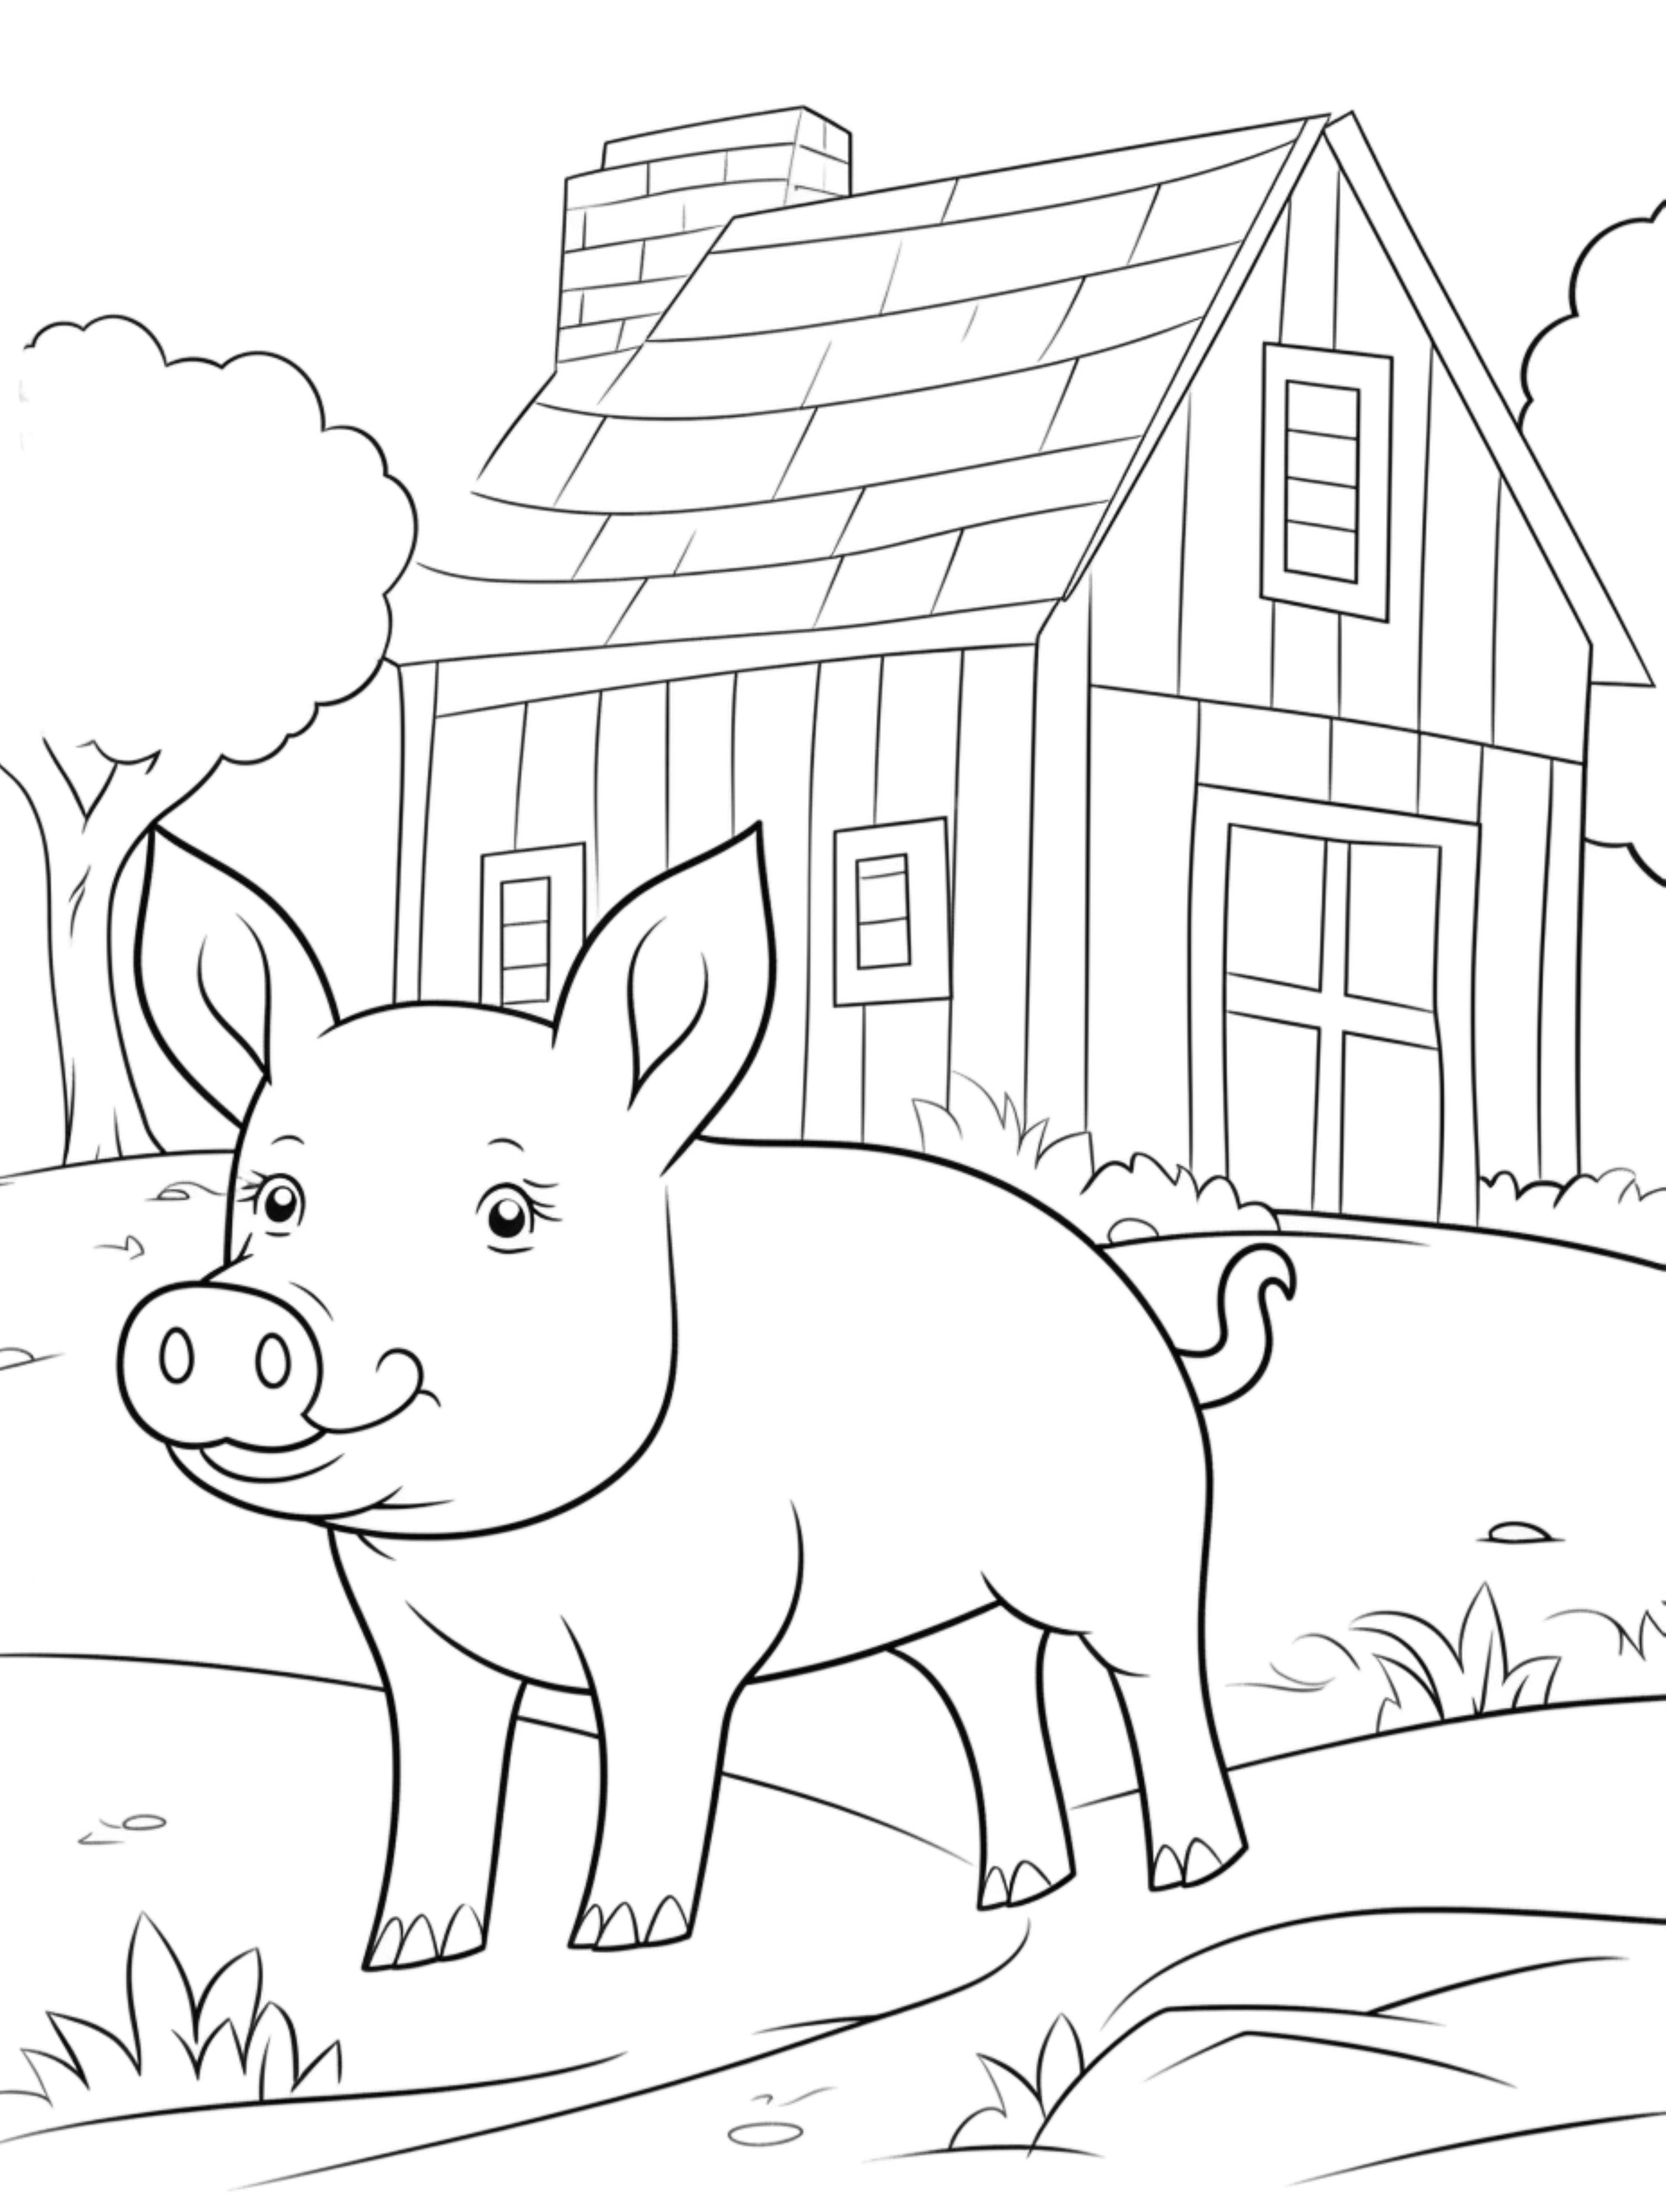 01 cute piggy in its habitat coloring page for kids